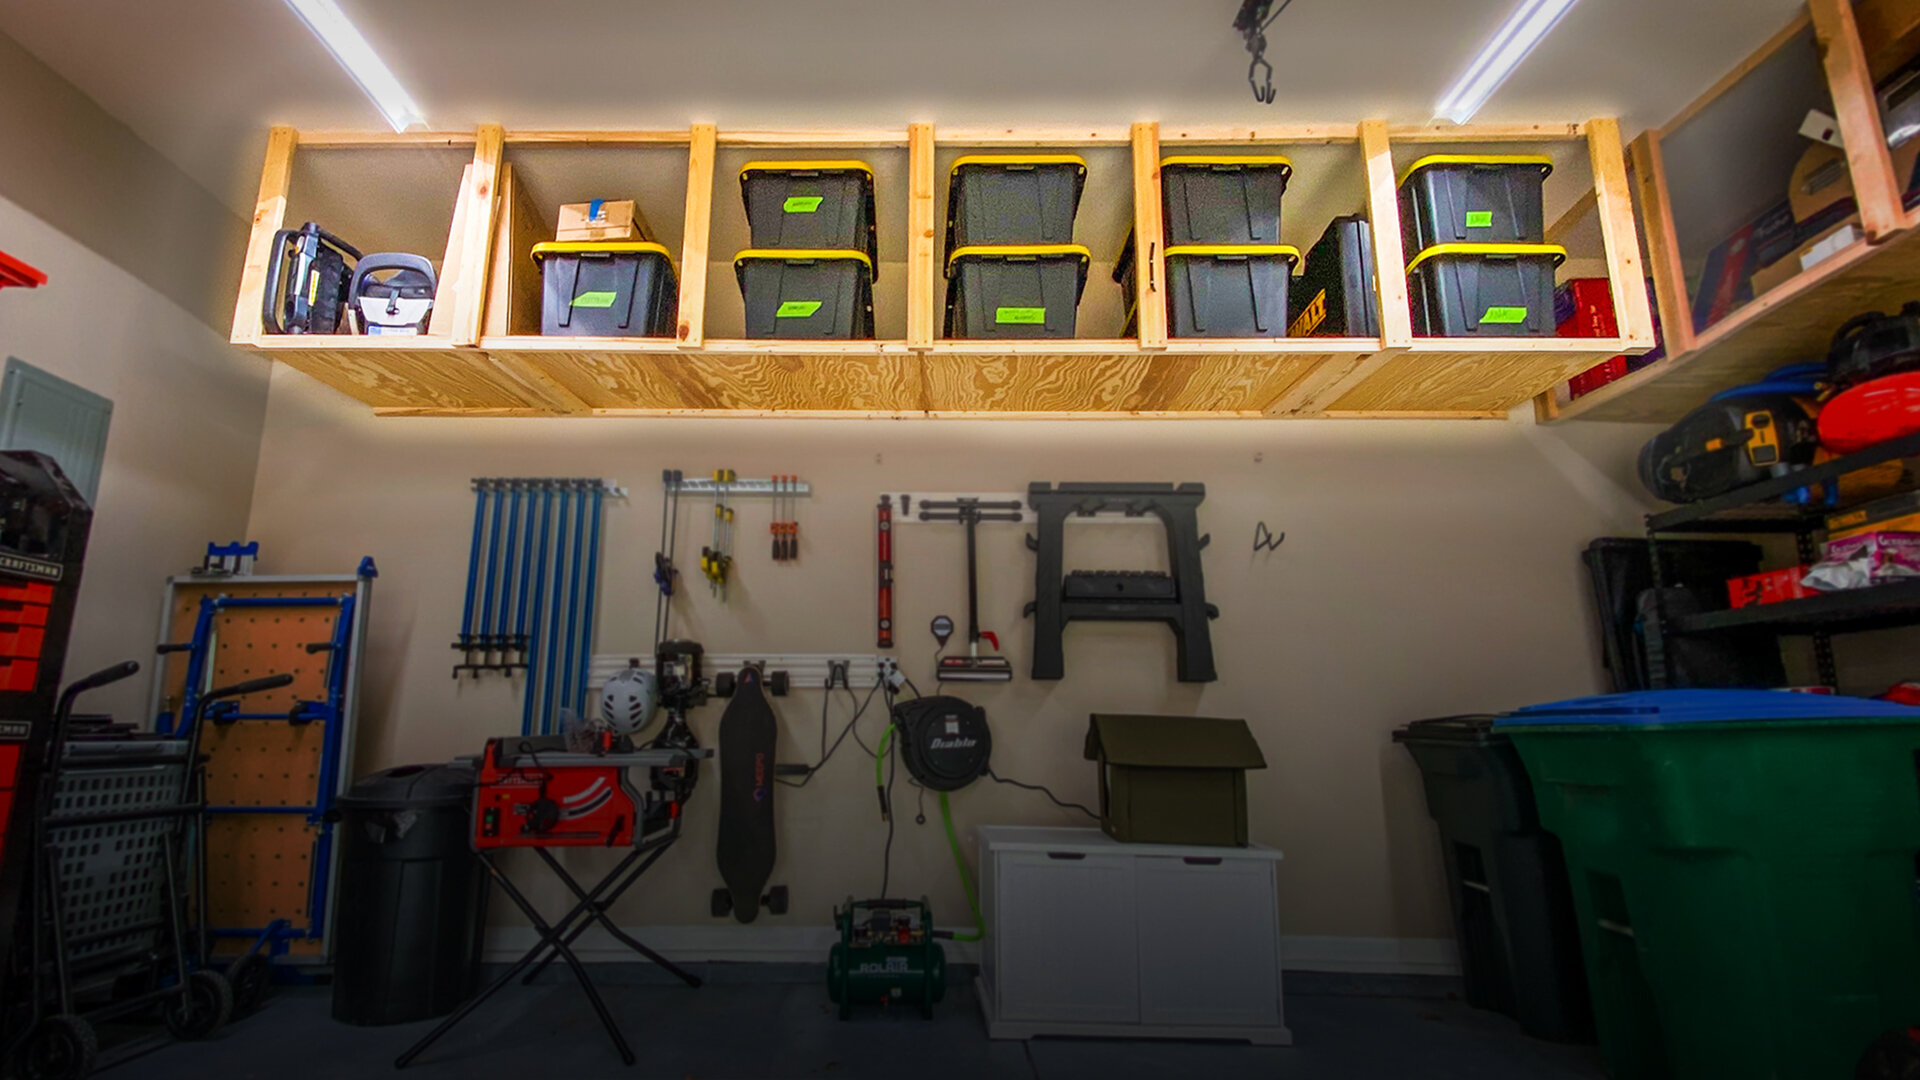 How To Build Diy Garage Storage Shelves, How To Hang Shelves In A Garage